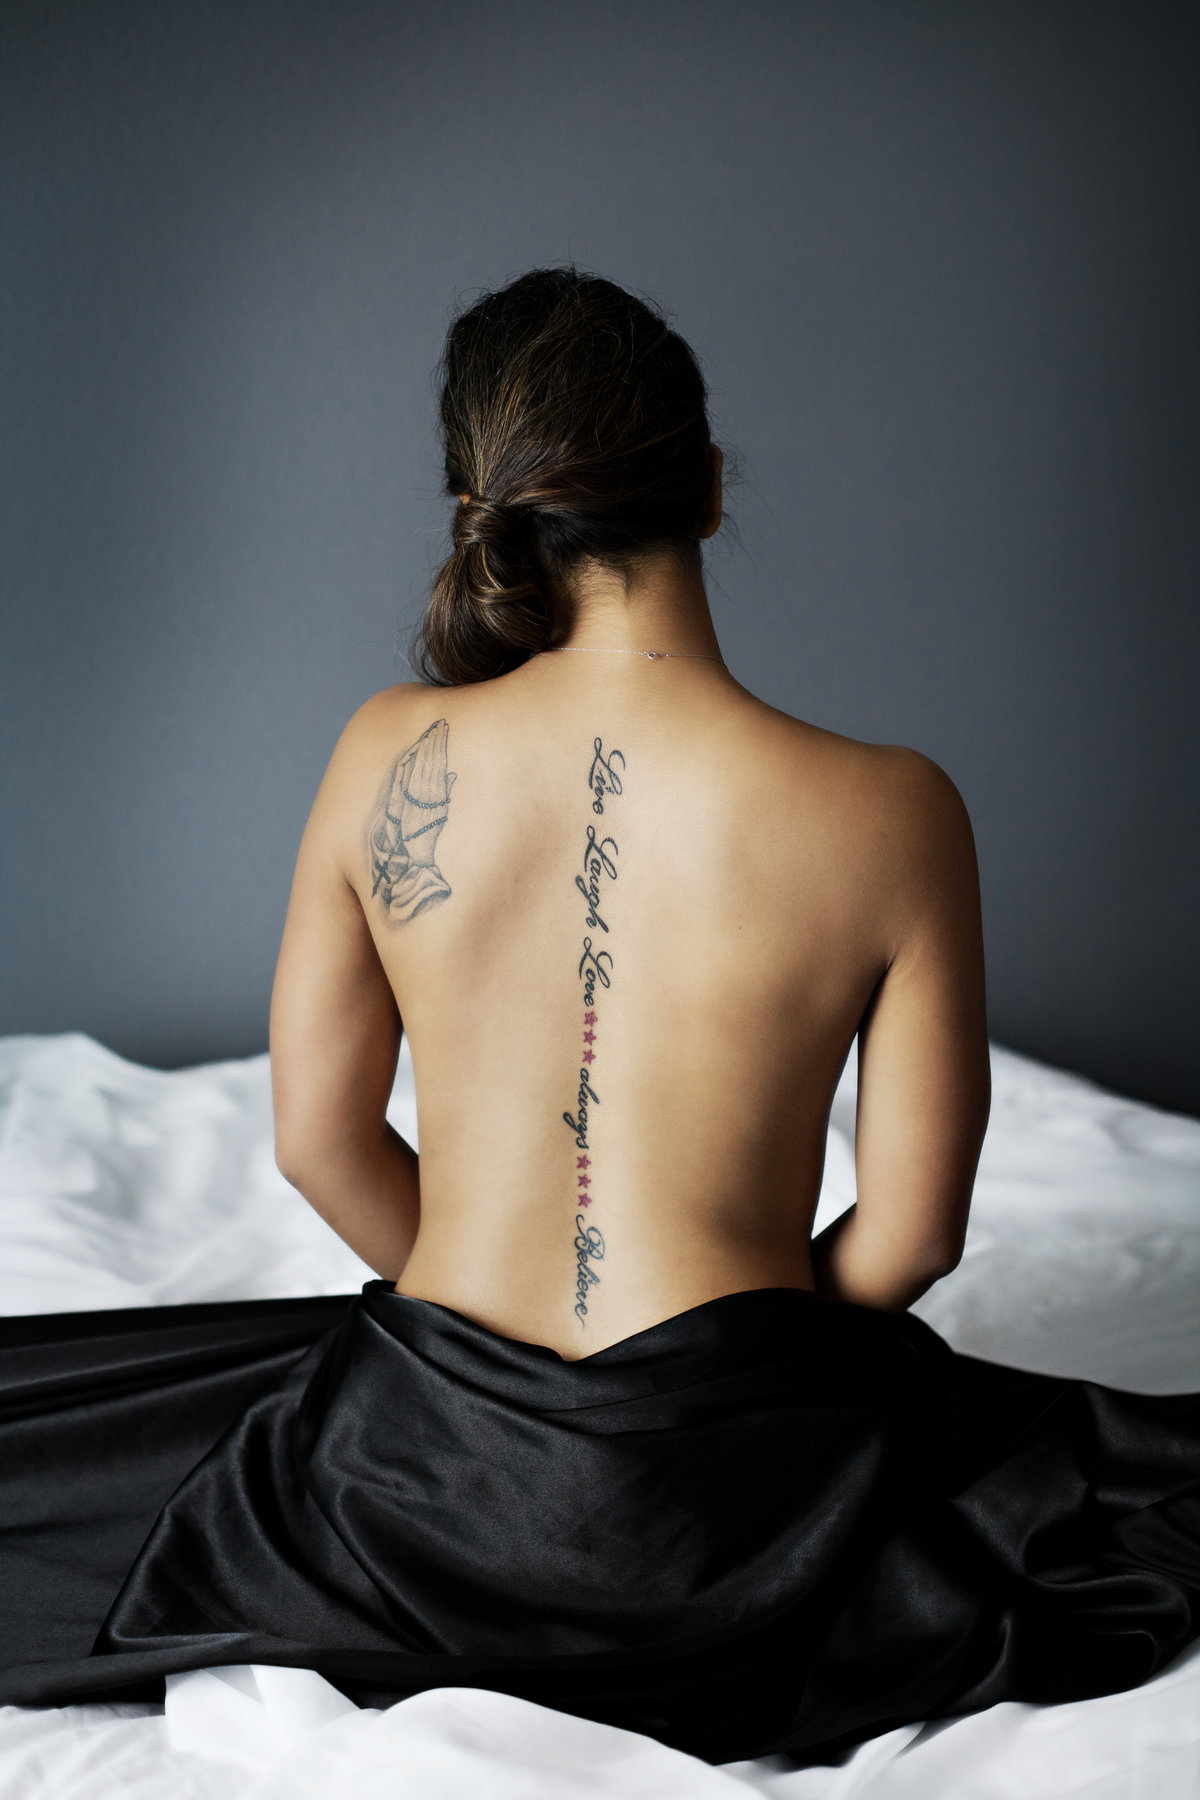 Woman with her naked back to camera shows off her tattoos